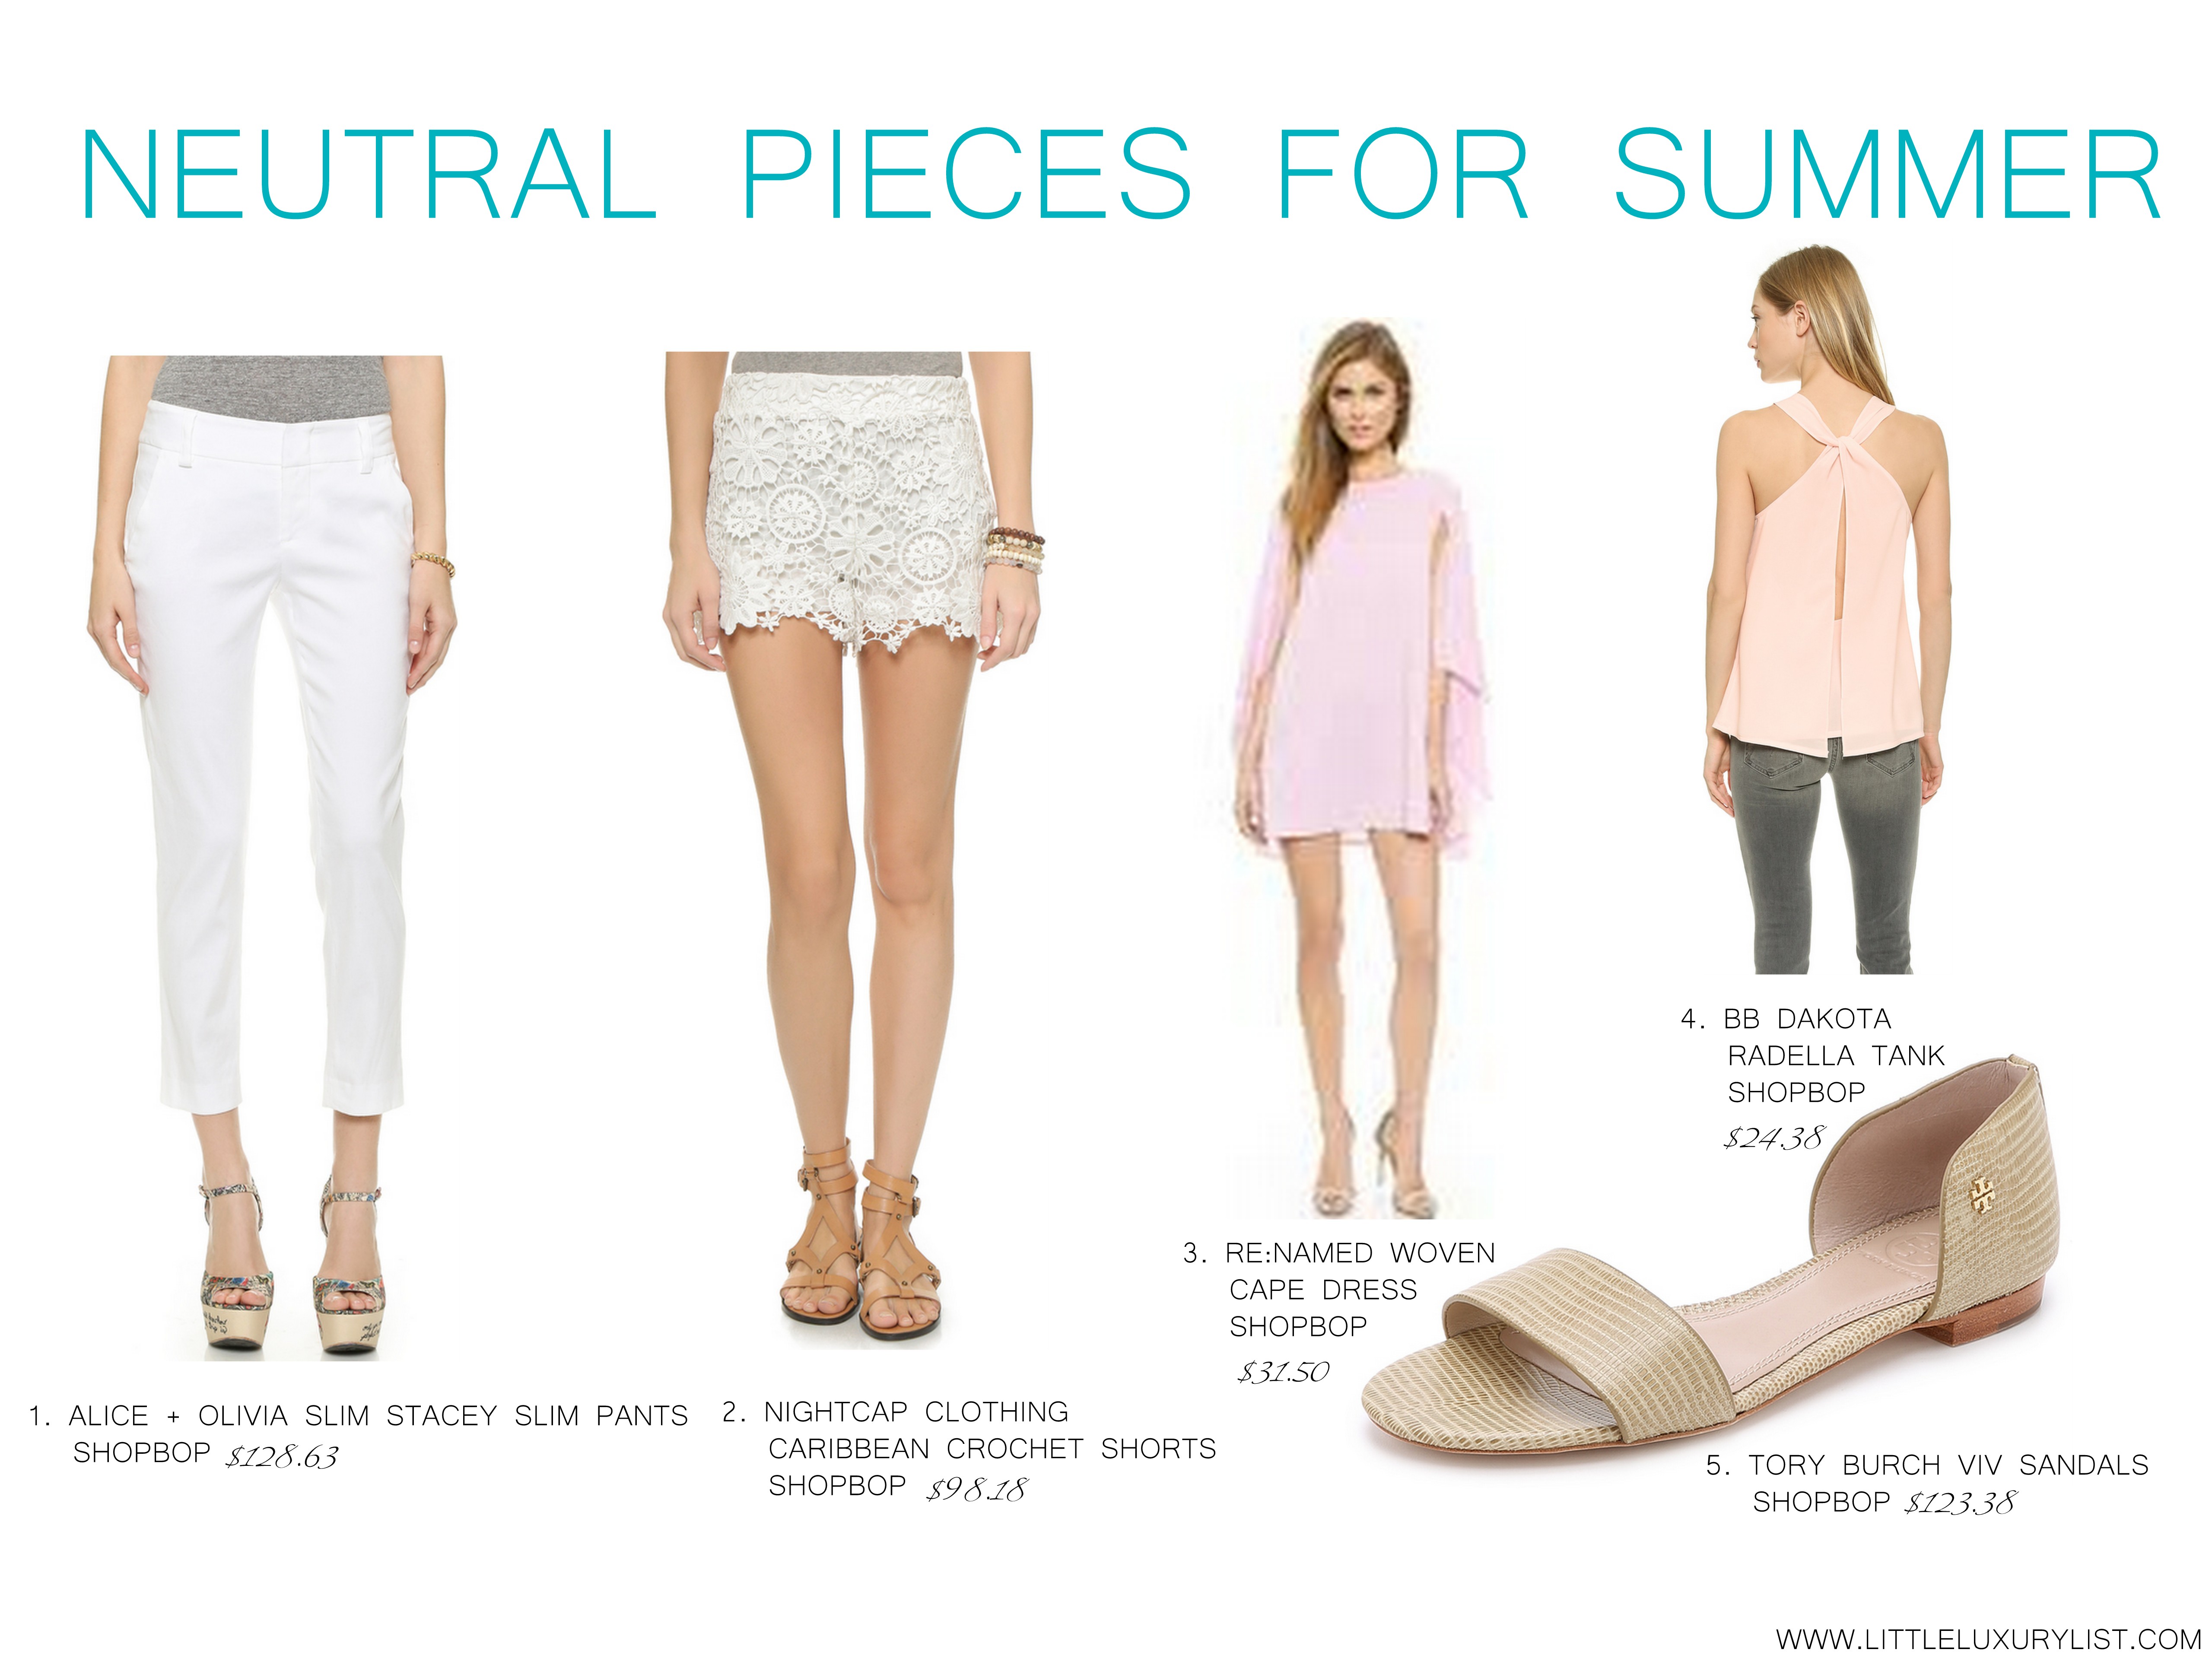 Neutral Pieces for summer by little luxury list